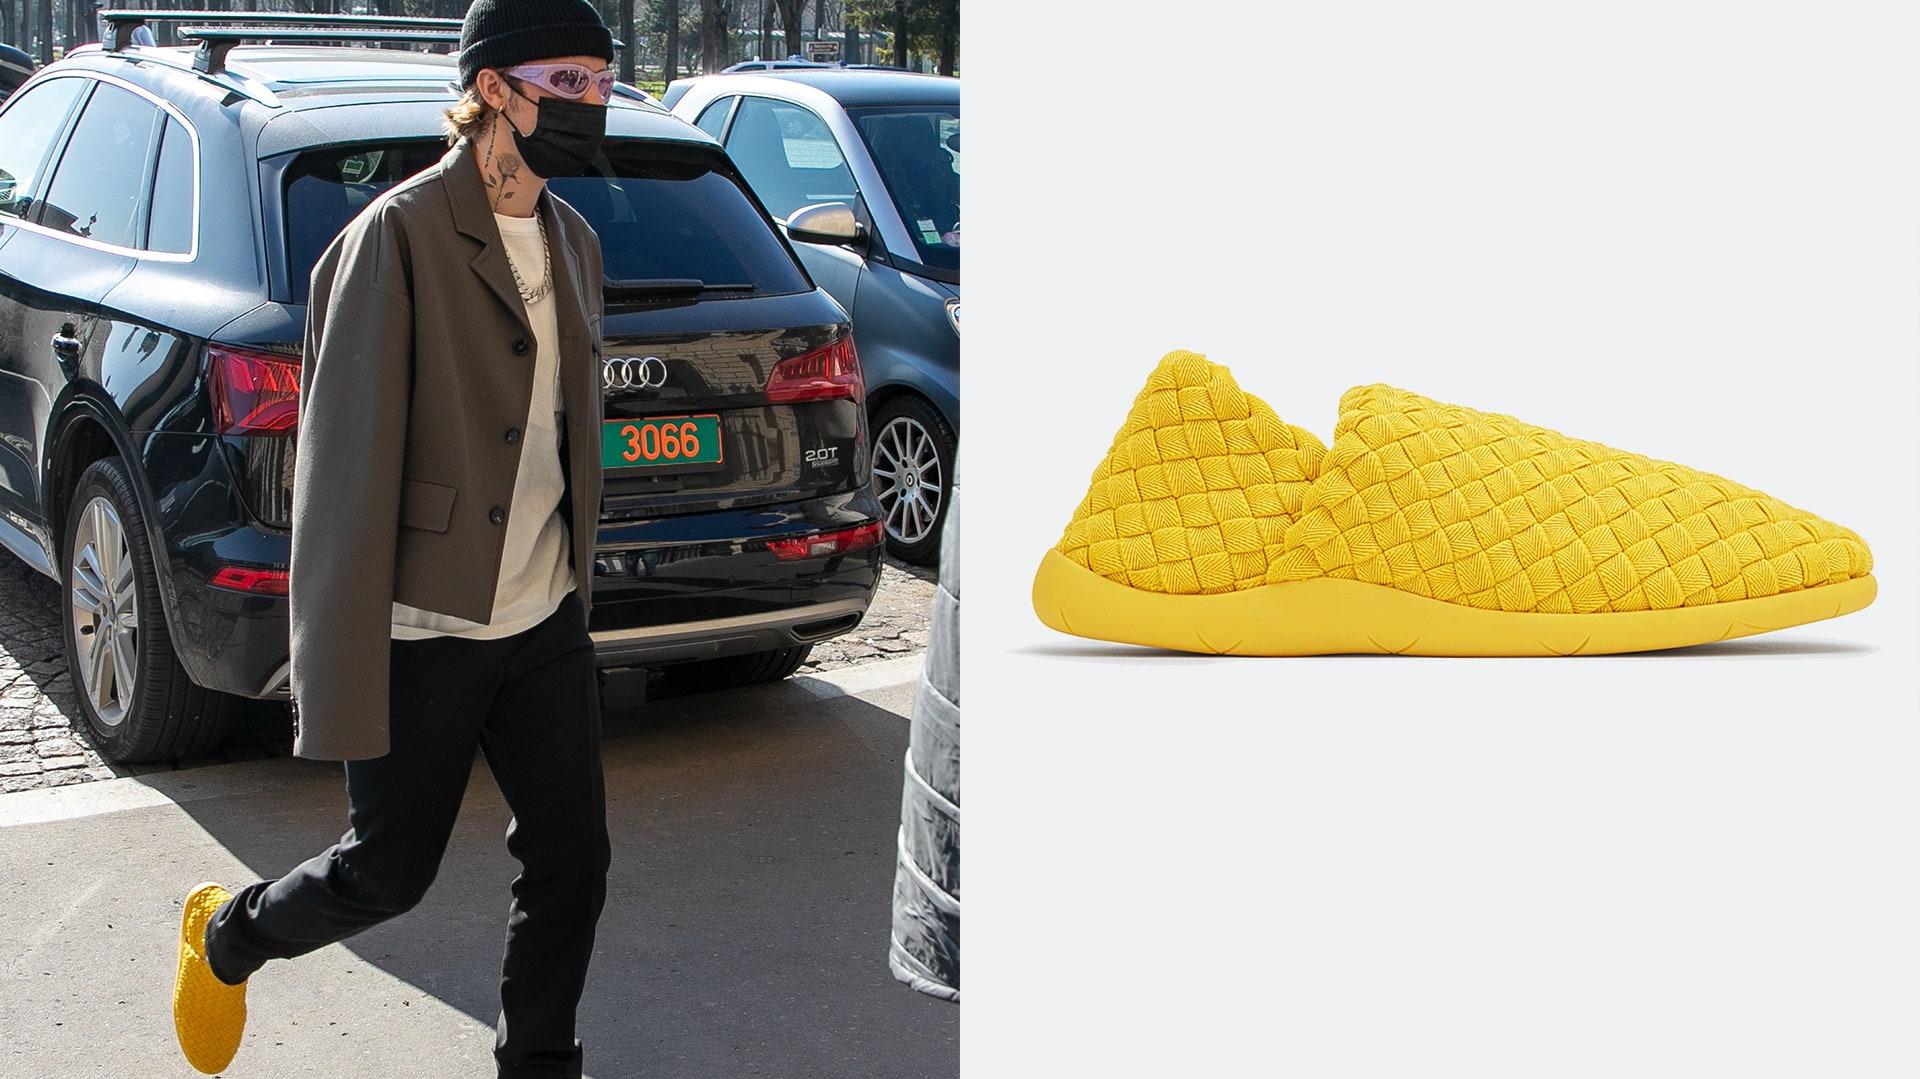 Justin Bieber Has Traded In His Yeezys For Grown Up Bottega Vea